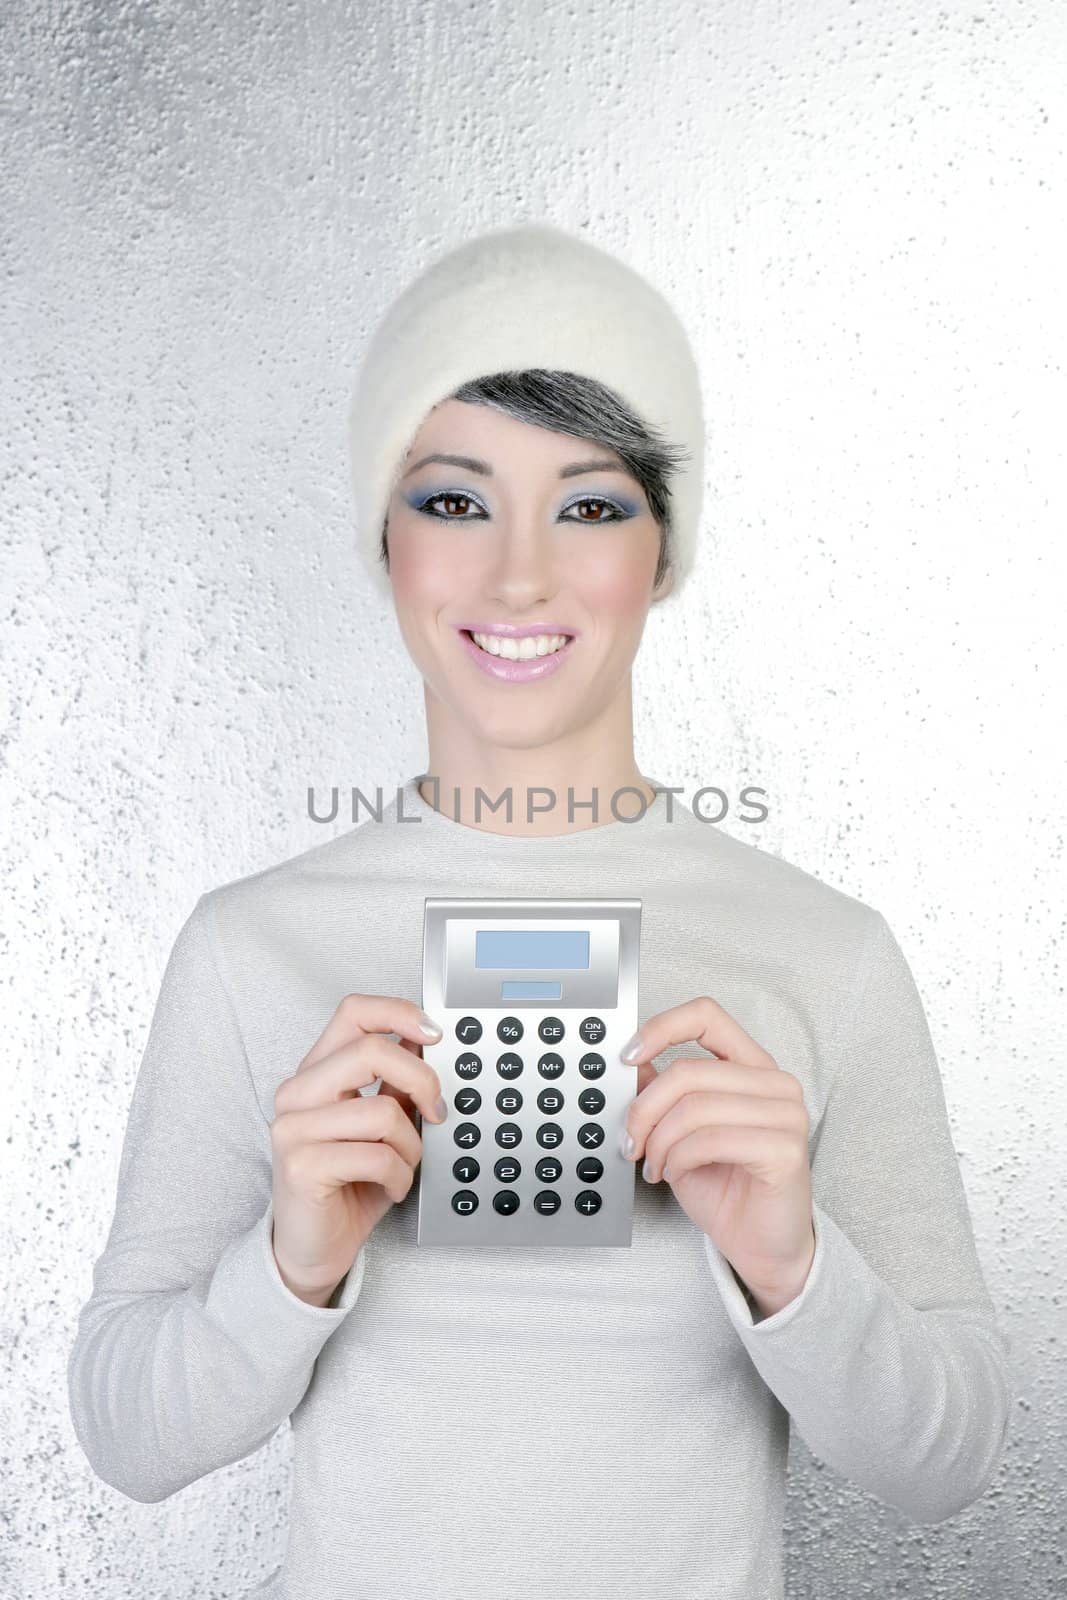 hapy futuristic fashion winter woman holding calculator smiling silver background